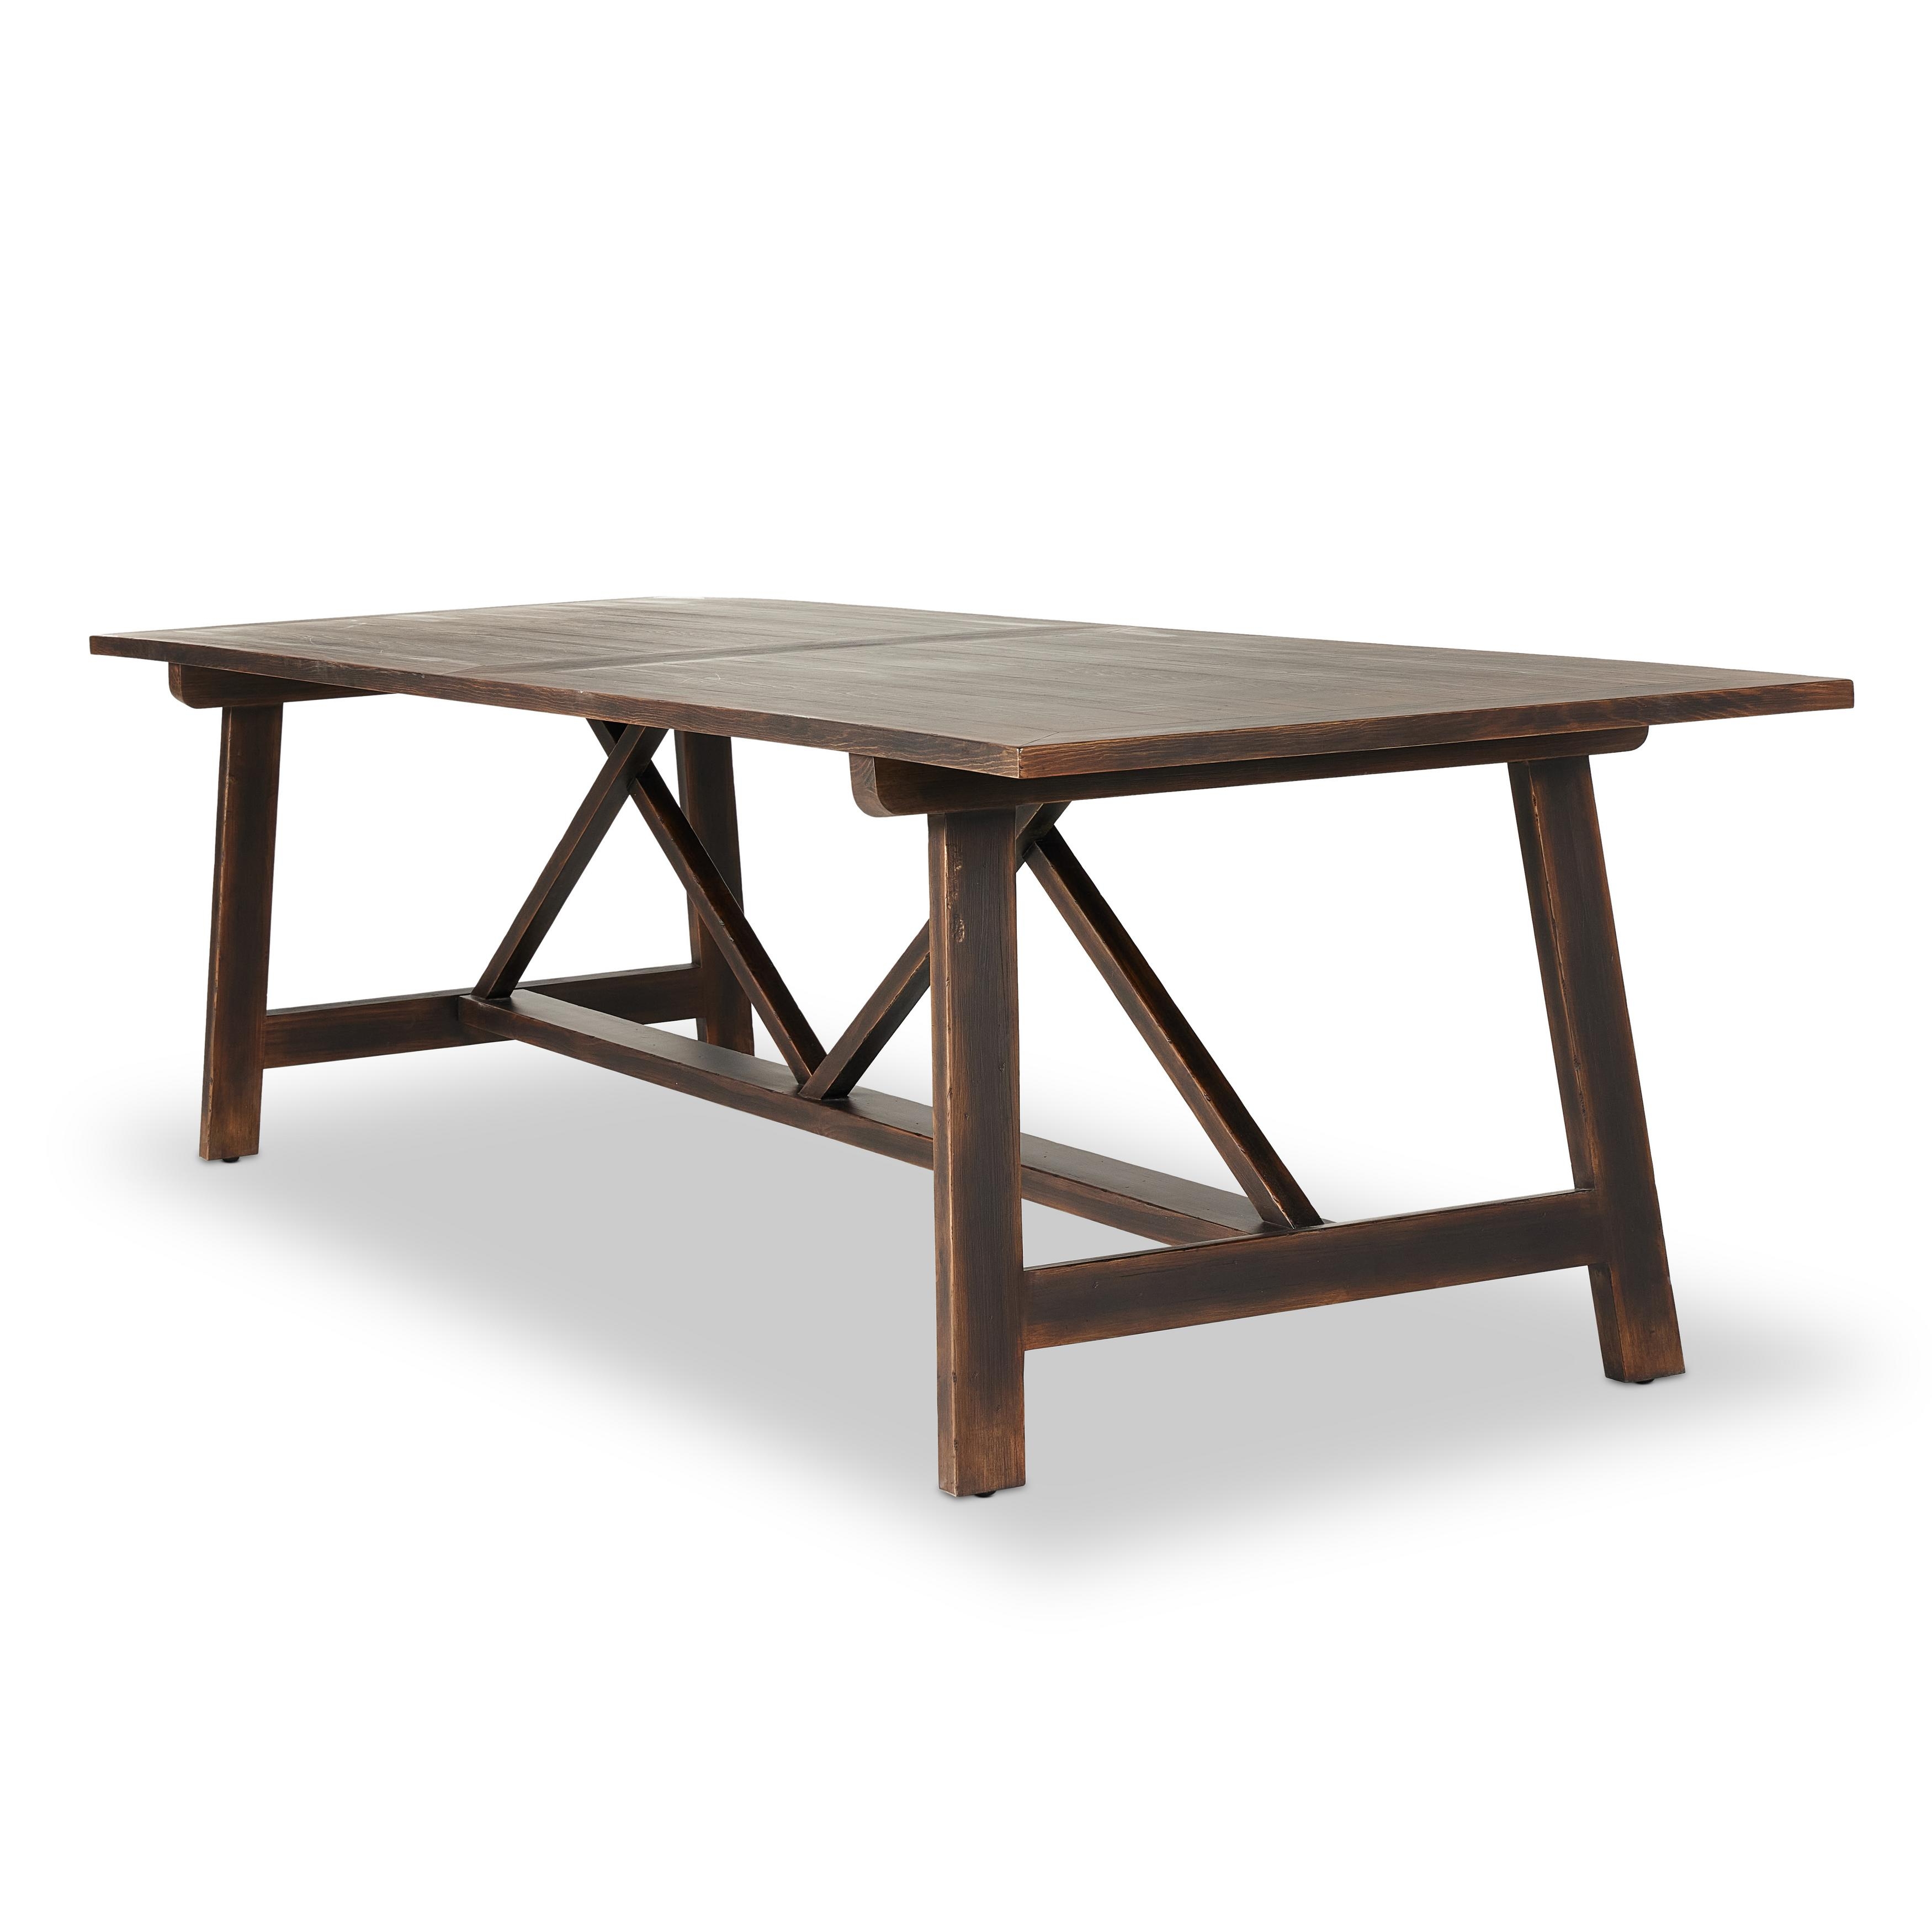 The 1500 Kilometer Dining Table-Agd Brwn - Image 8